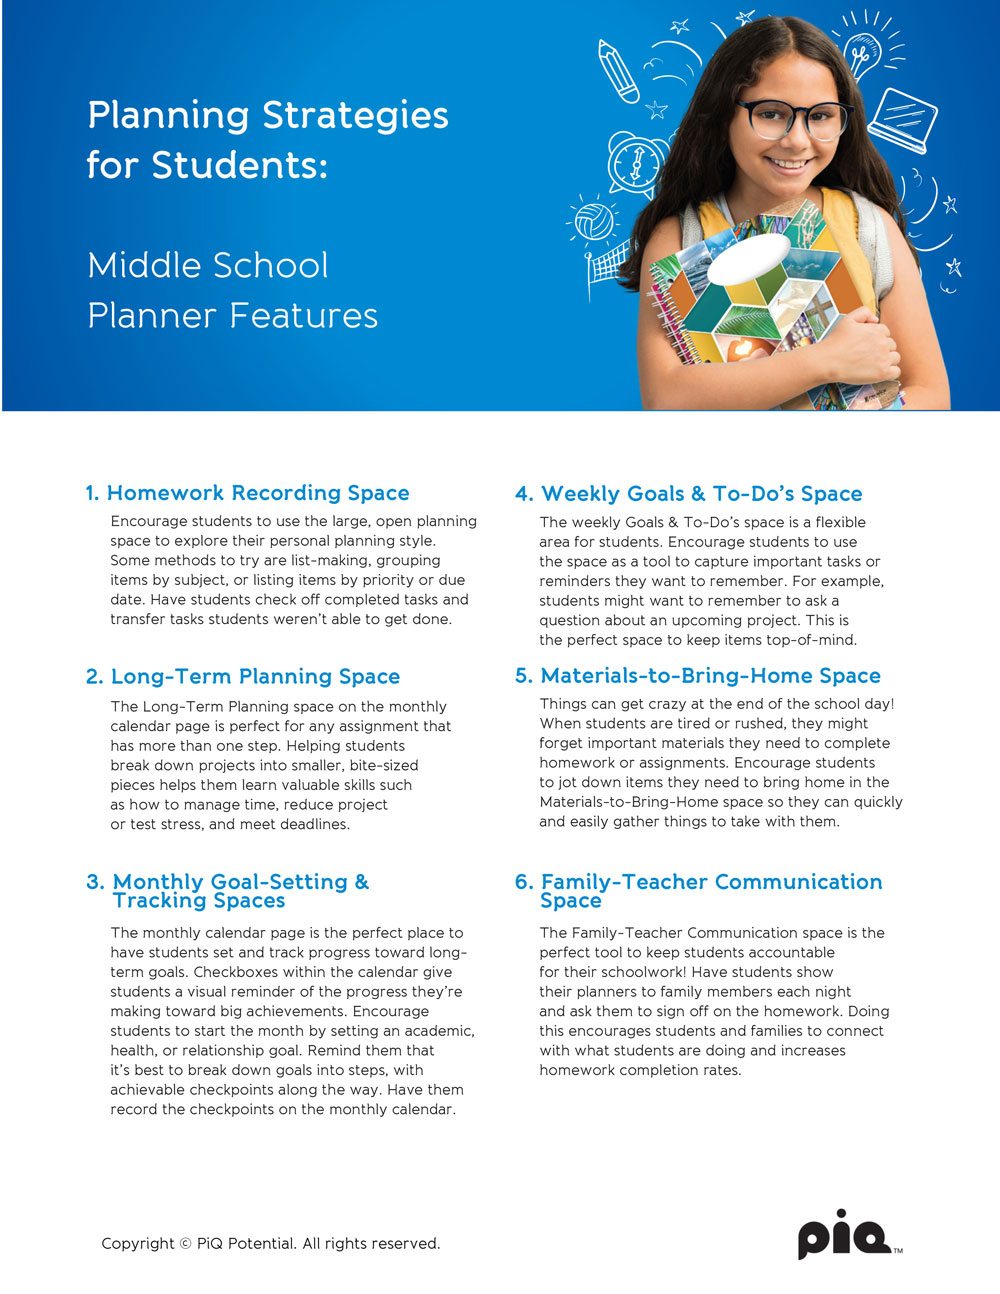 Planning Strategies for Students: Middle School Planner Features